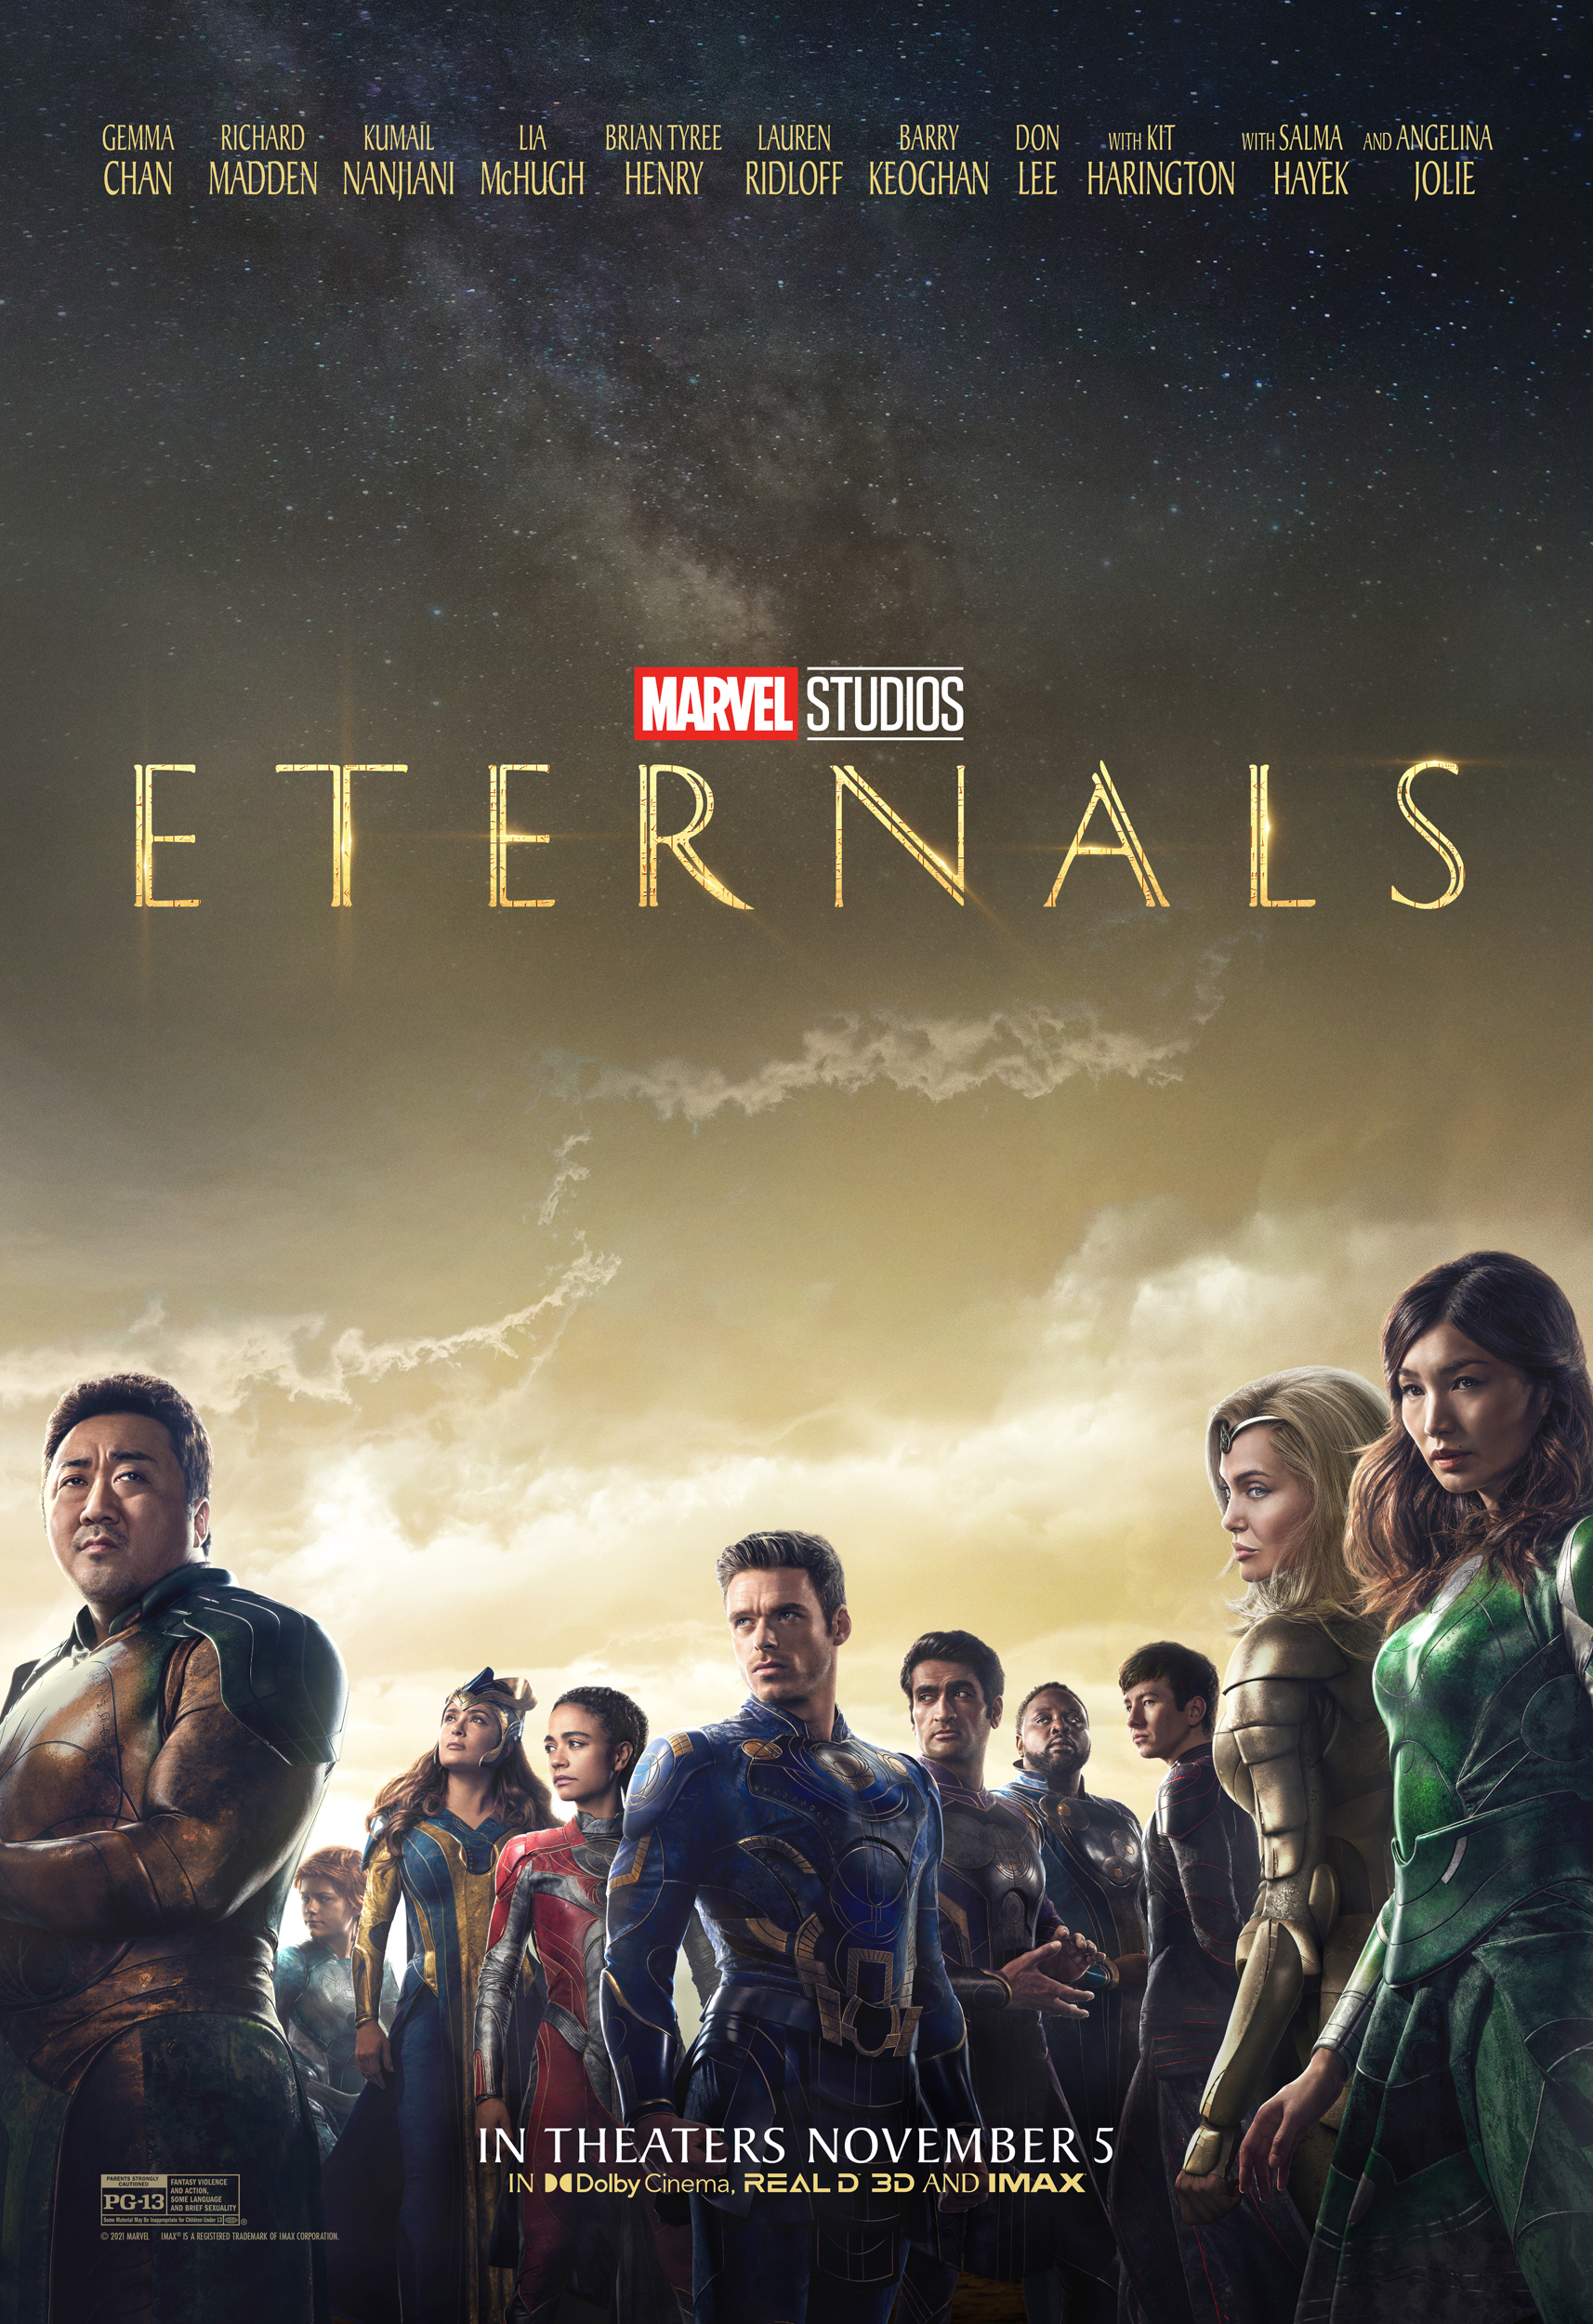 Eternals: No hope for humanity?